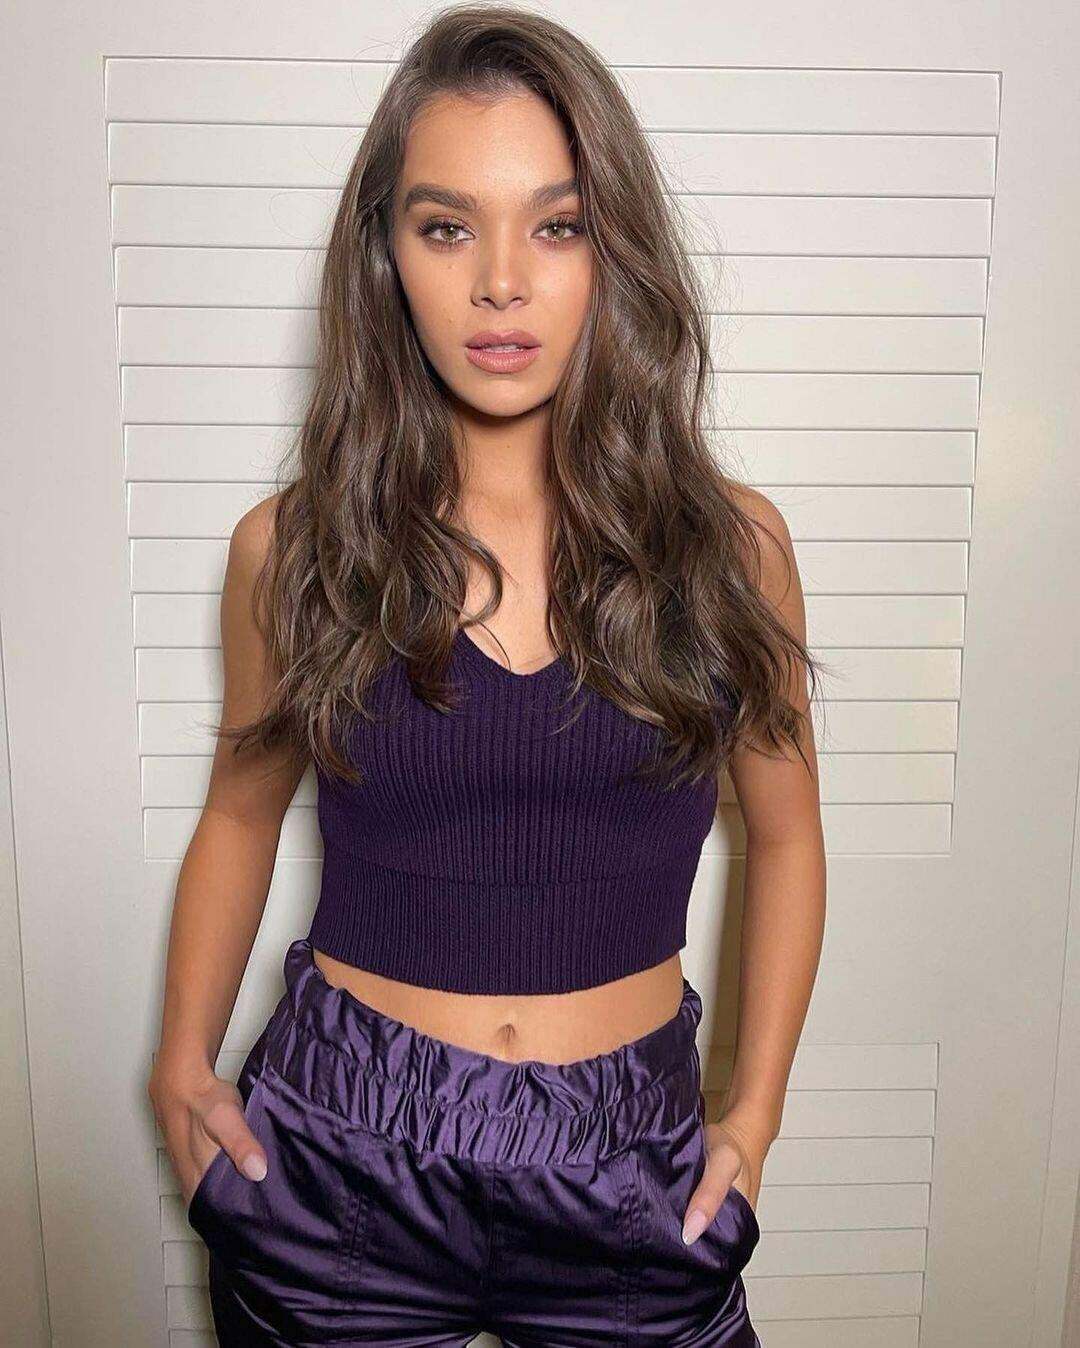 Hailee Steinfeld has been making me cum so hard lately